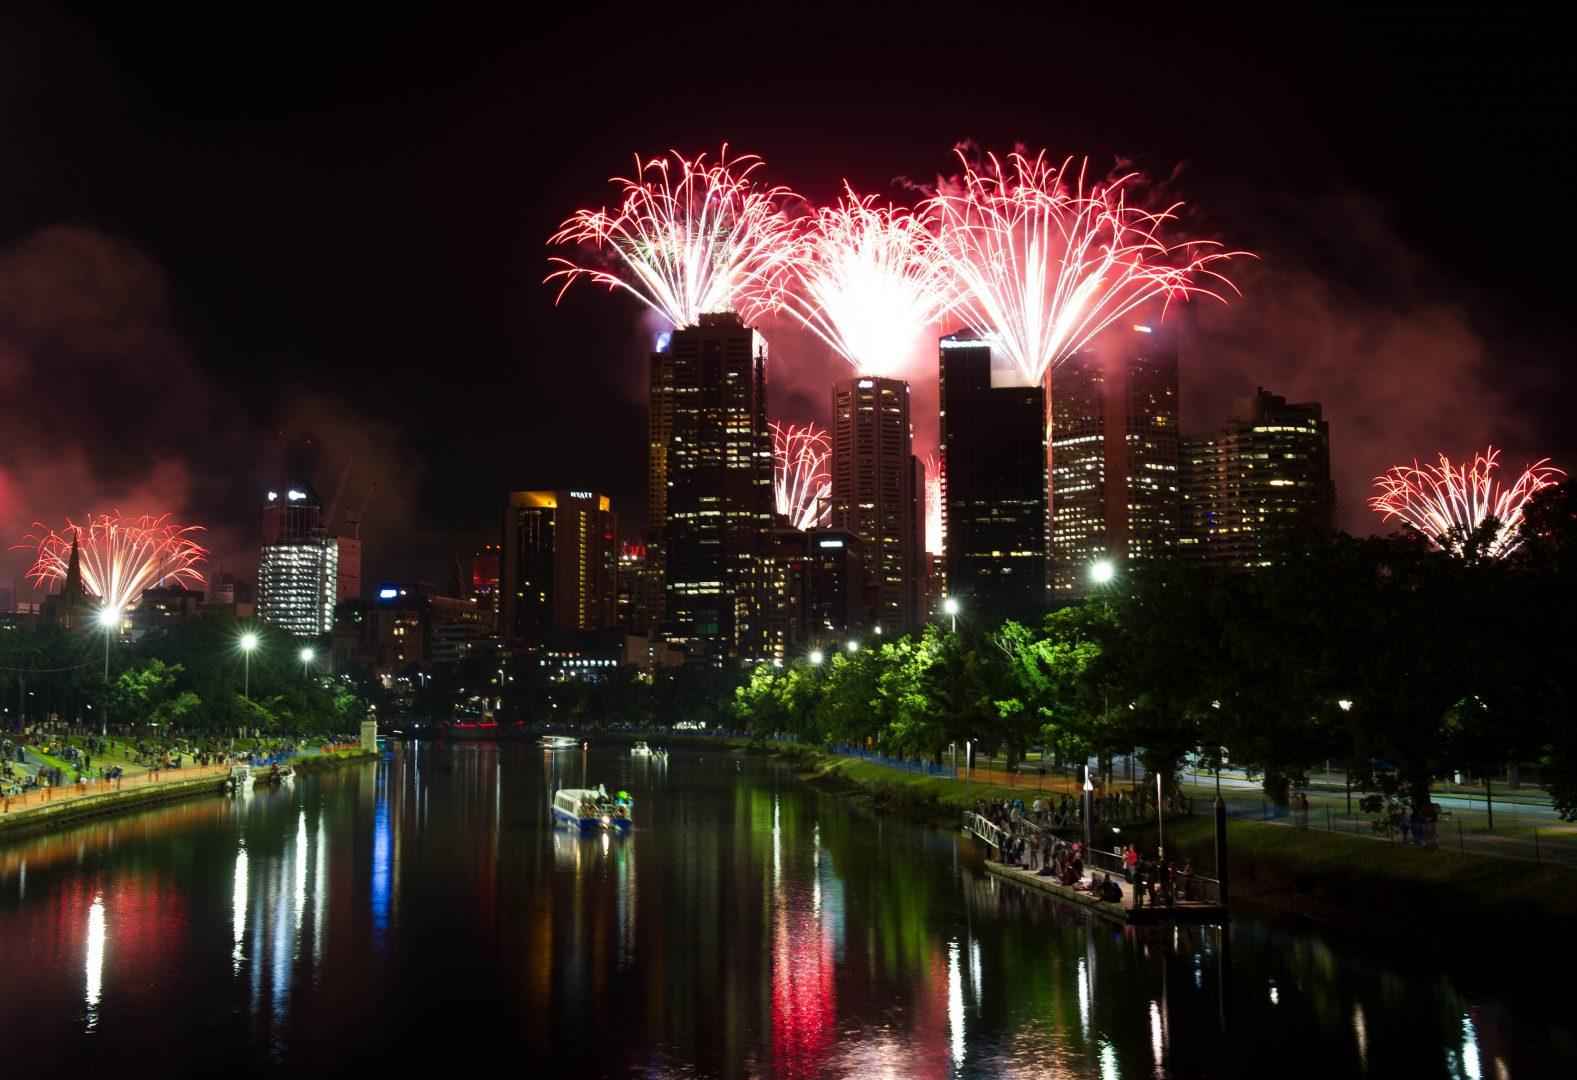  Bai Xue/Xinhua/ Zuma Press ”¢ TNS
People watch the New Year’s Eve fireworks as part of New Year’s Eve celebrations at the riverside of Yarra River in Melbourne, Australia, Monday, December 31, 2012. 